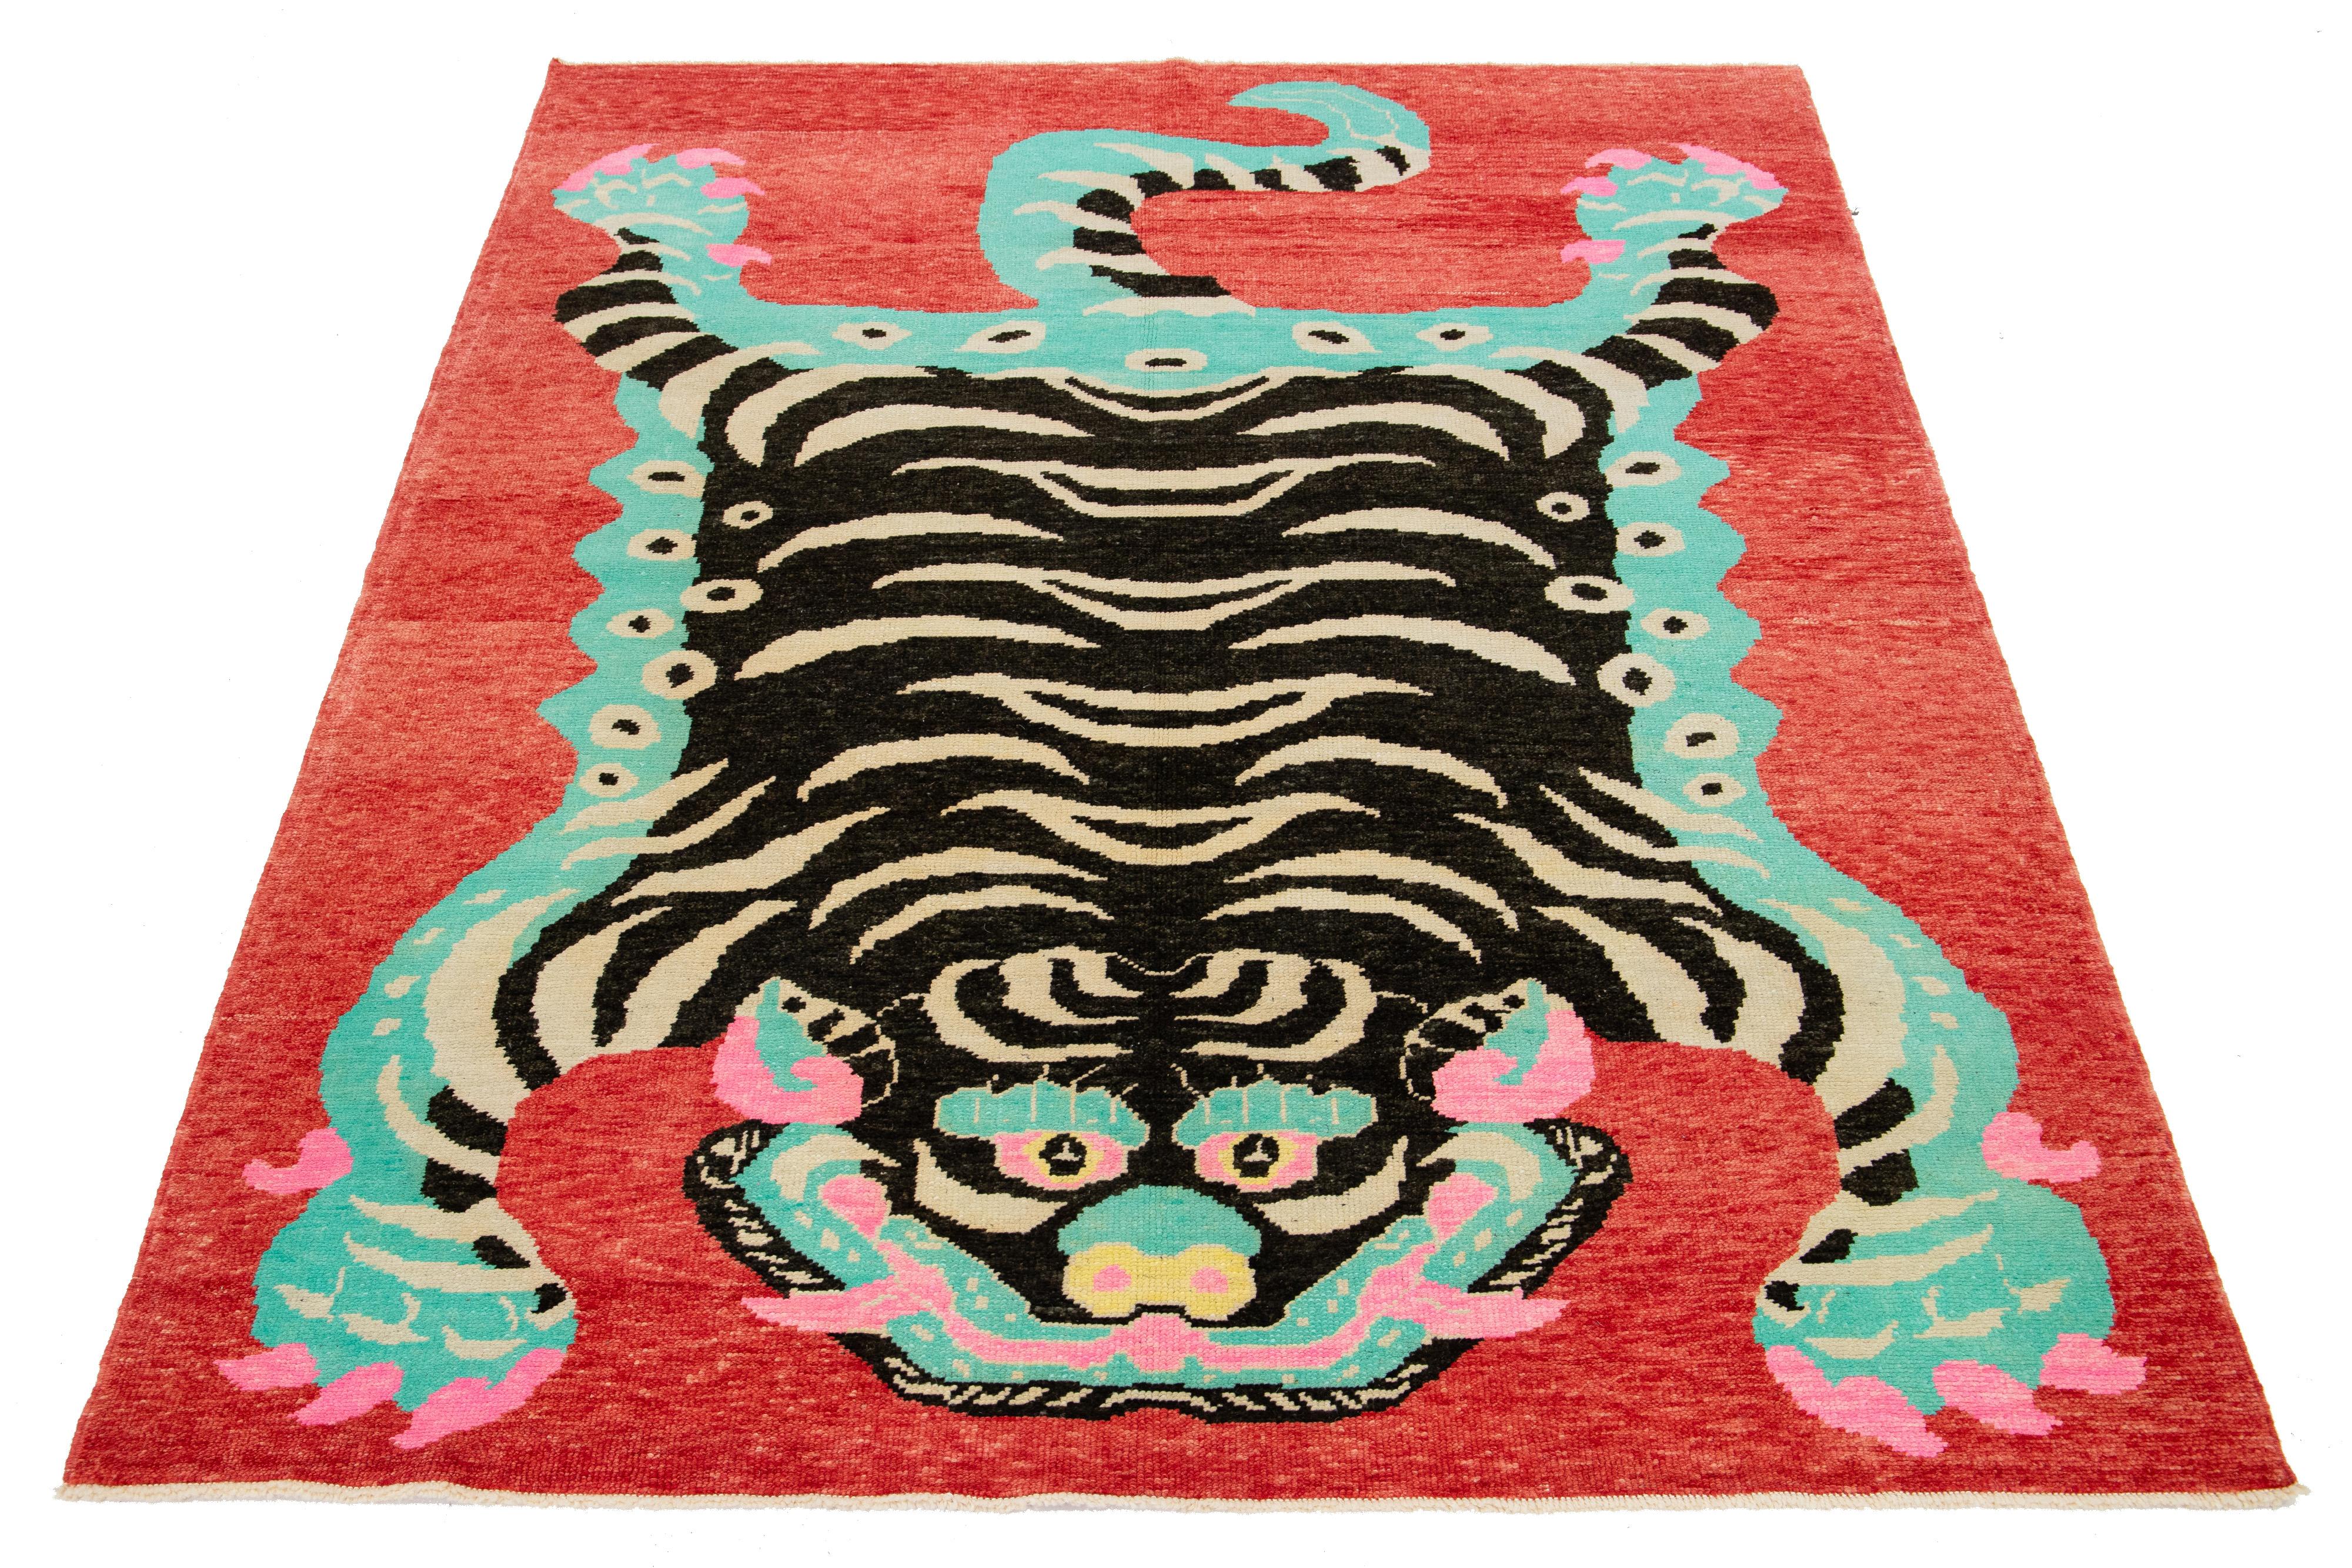 This beautiful handmade Turkish Art Deco wool rug has a red field. It features black, beige, pink, and turquoise accent colors in a stunning tiger pictorial design.

This rug measures 6'11